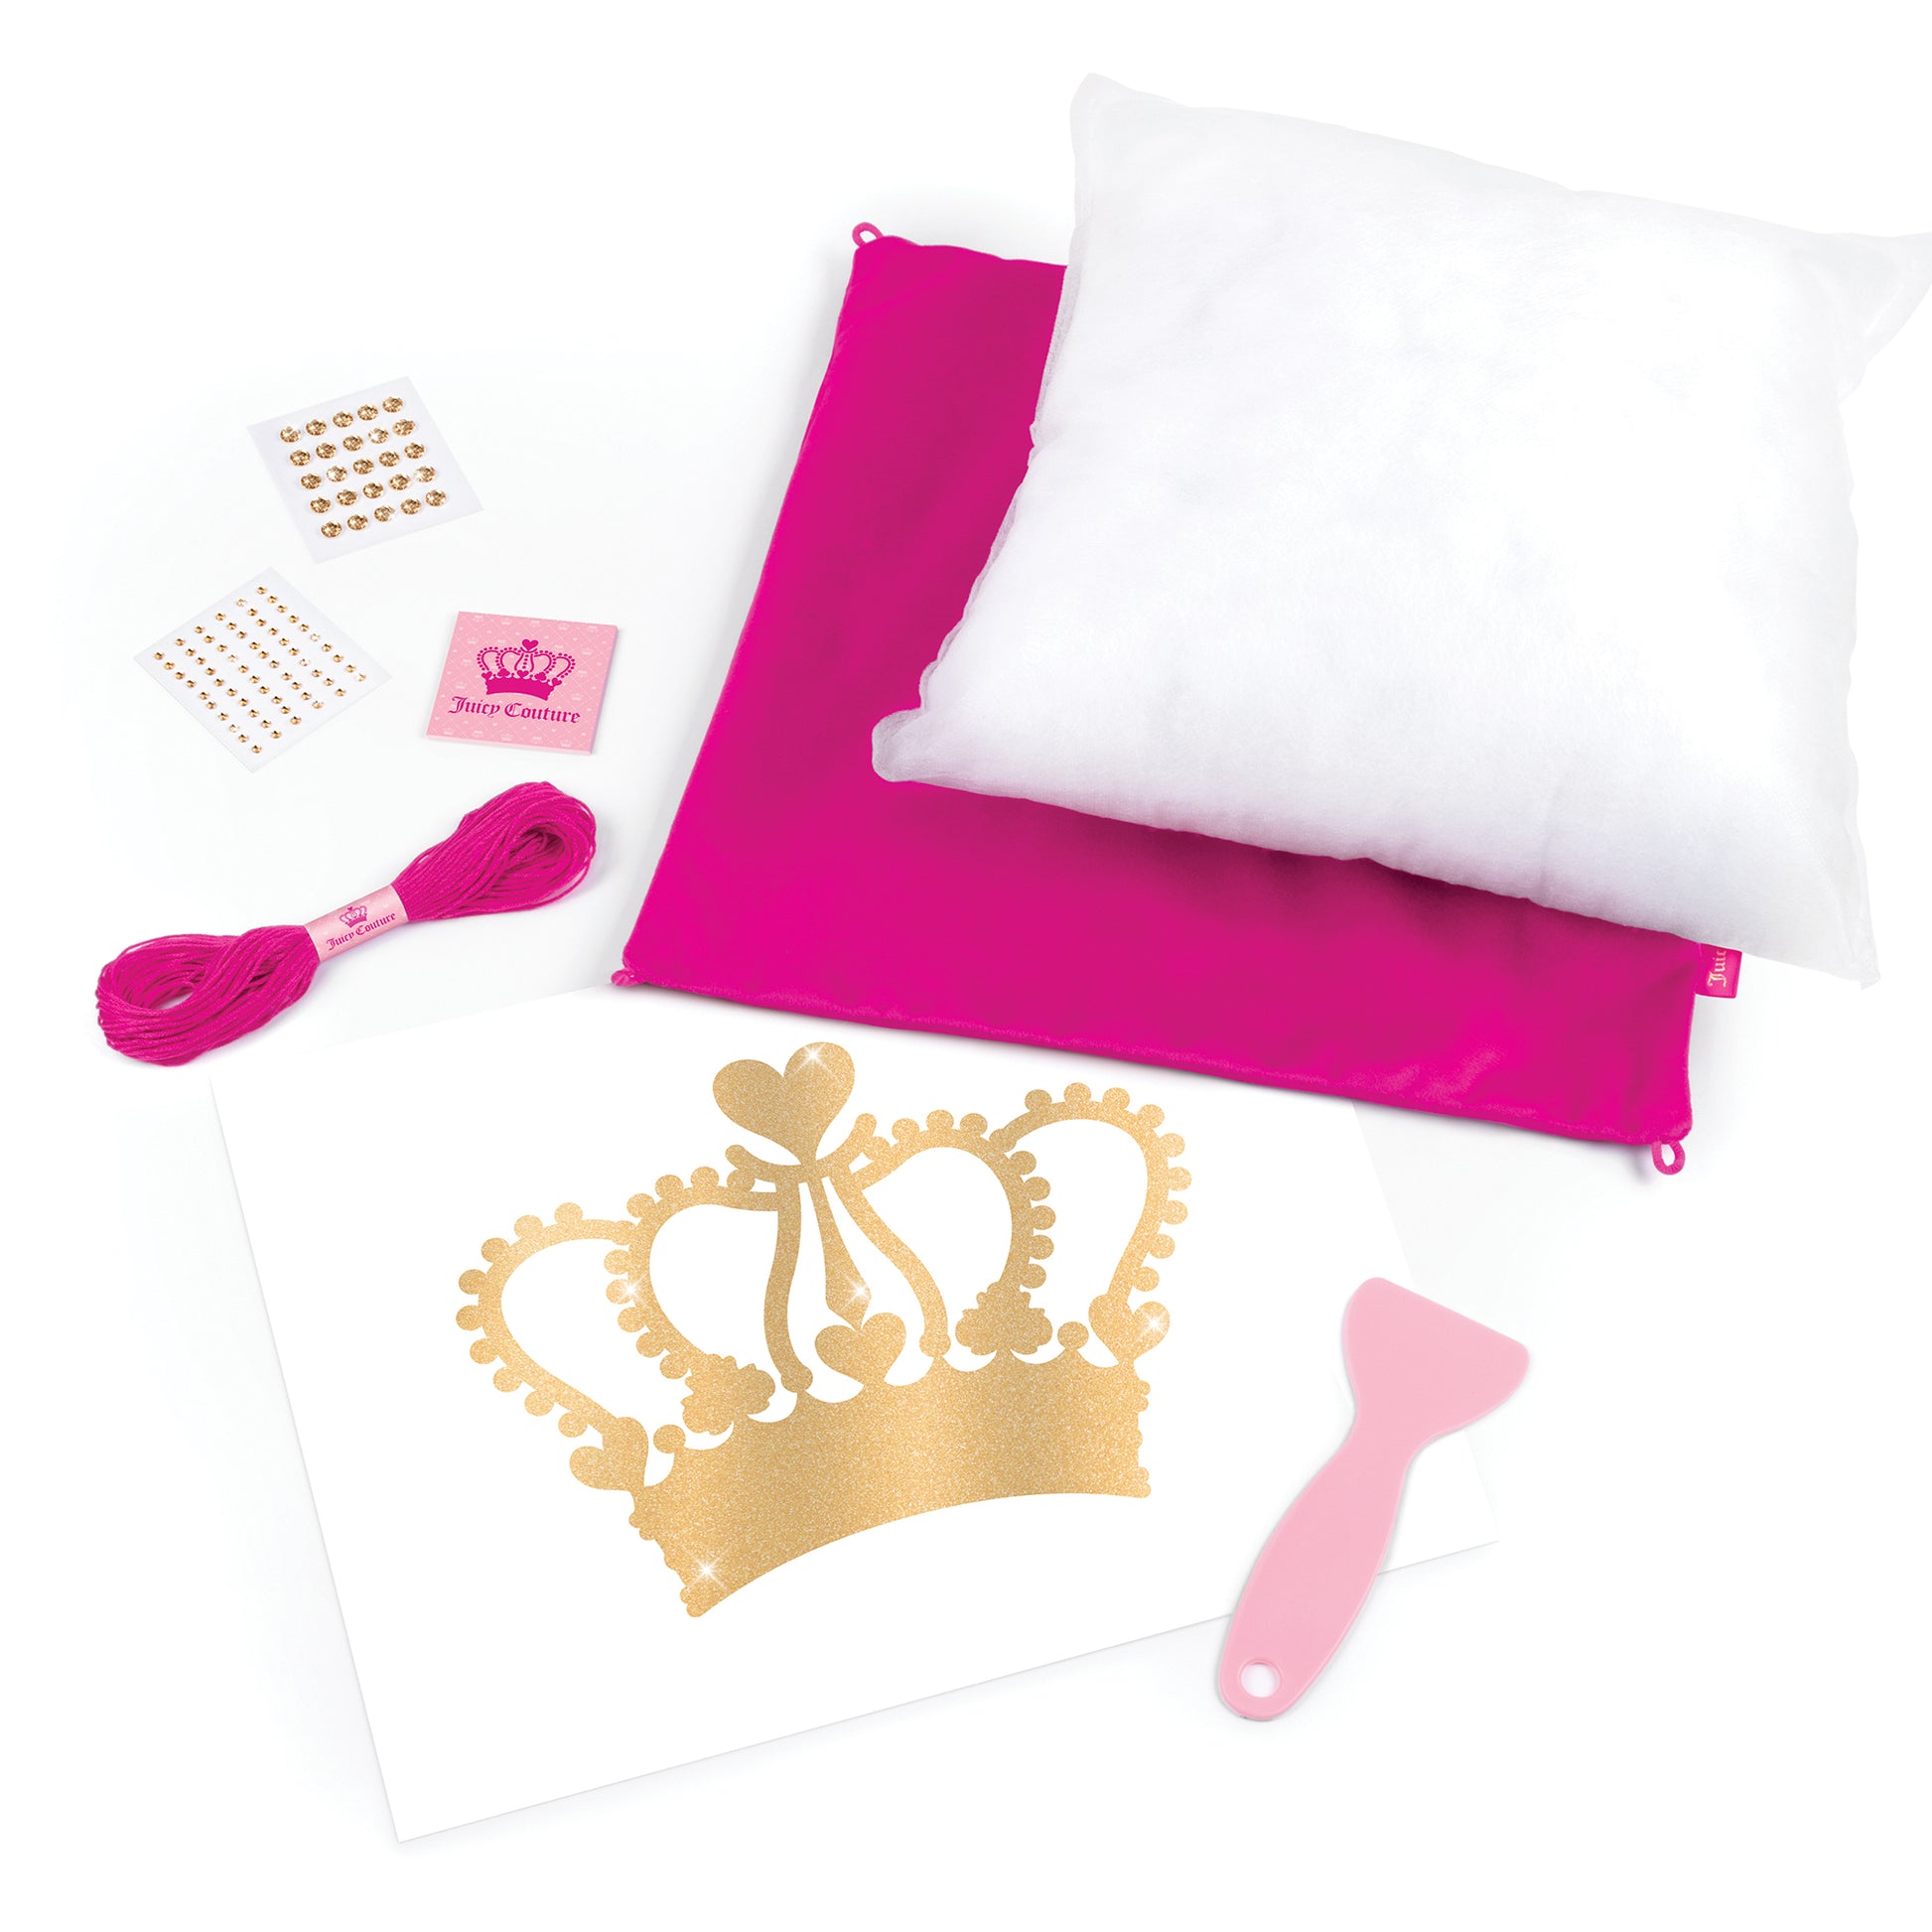 Juicy Couture™ DIY Lux Pillow – Make It Real